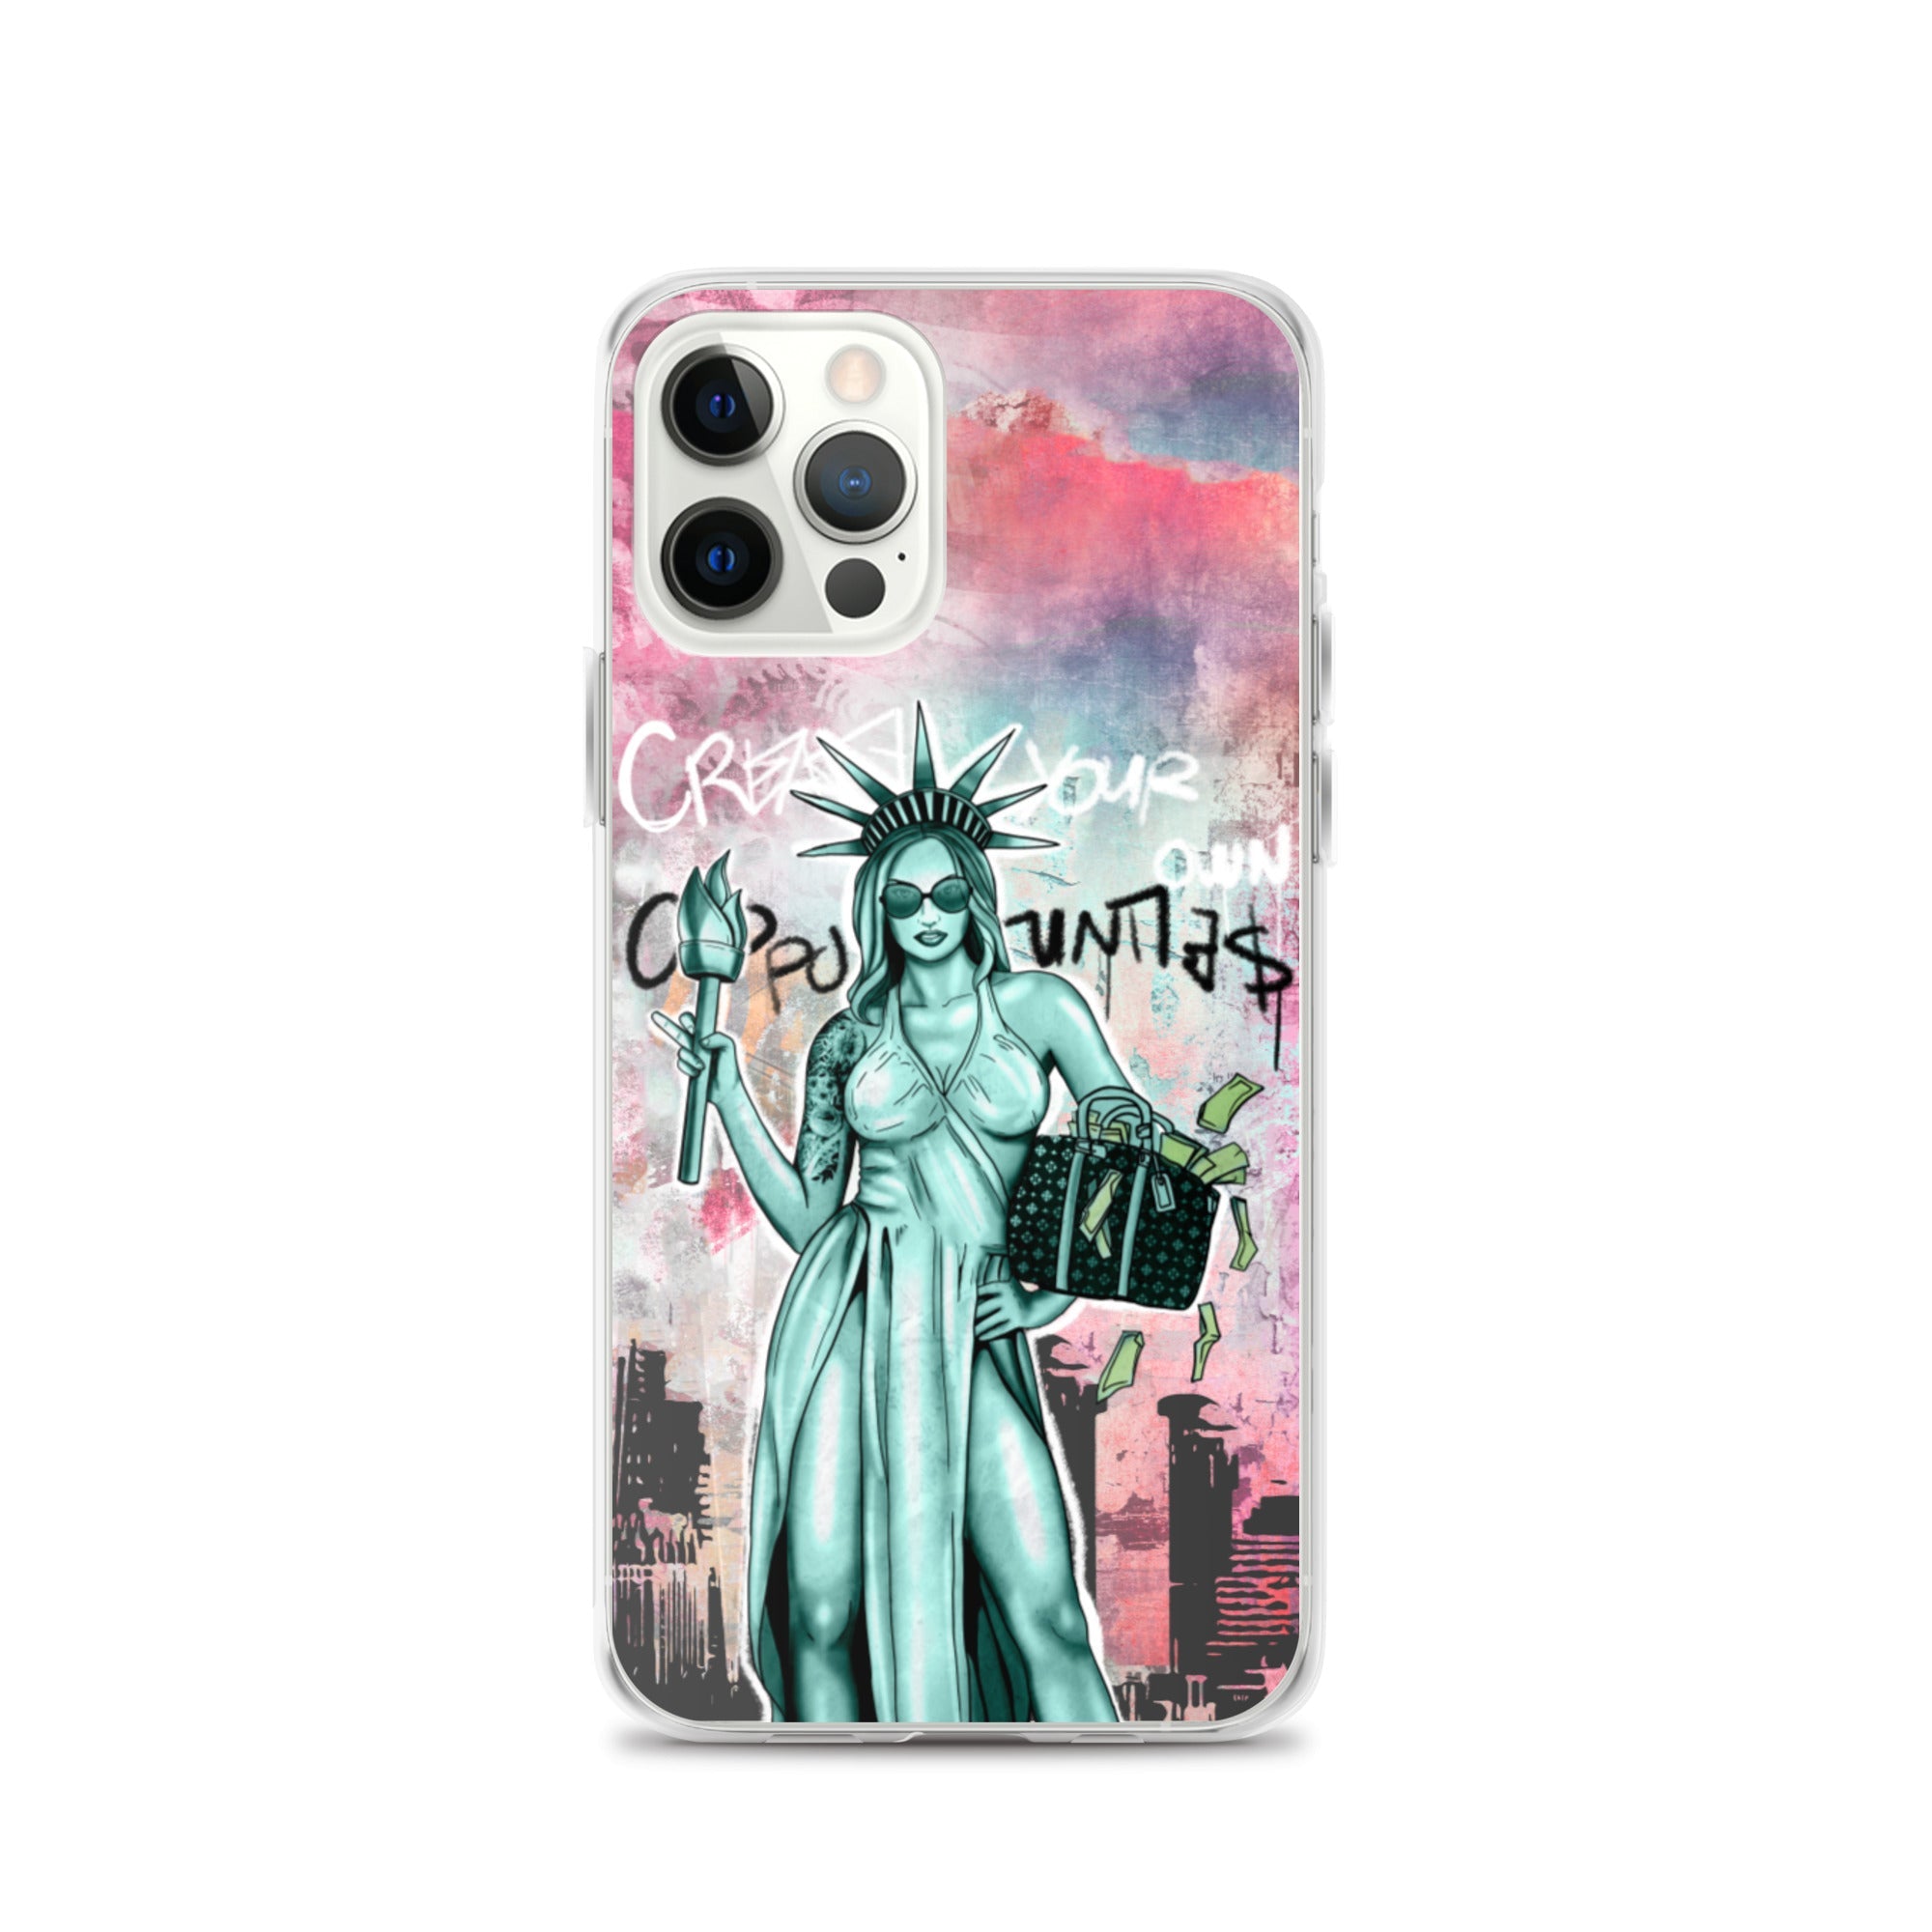 Create Your Own Opportunities iPhone Case - REBHORN DESIGN